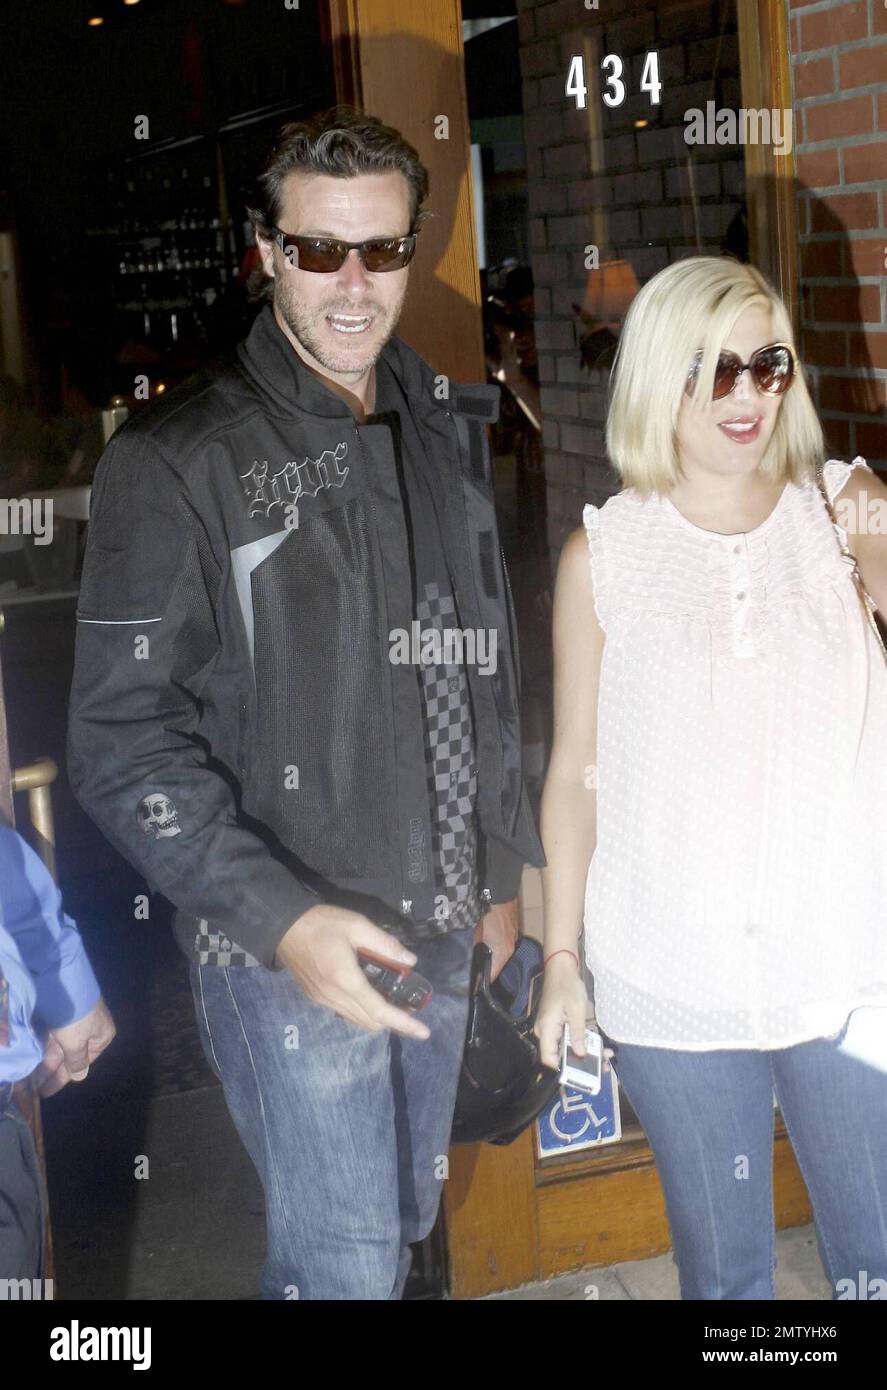 Tori Spelling and husband Dean McDermott have some fun and pull out their cameras and film paparazzi as they leave La Scala in Beverly Hills. Dean also poses for a photo with photogs before he and Tori kiss goodbye. She gets in her SUV while hel hops on his red Ducati motorcycle and rides away. Los Angeles, CA. 8/21/08. Stock Photo